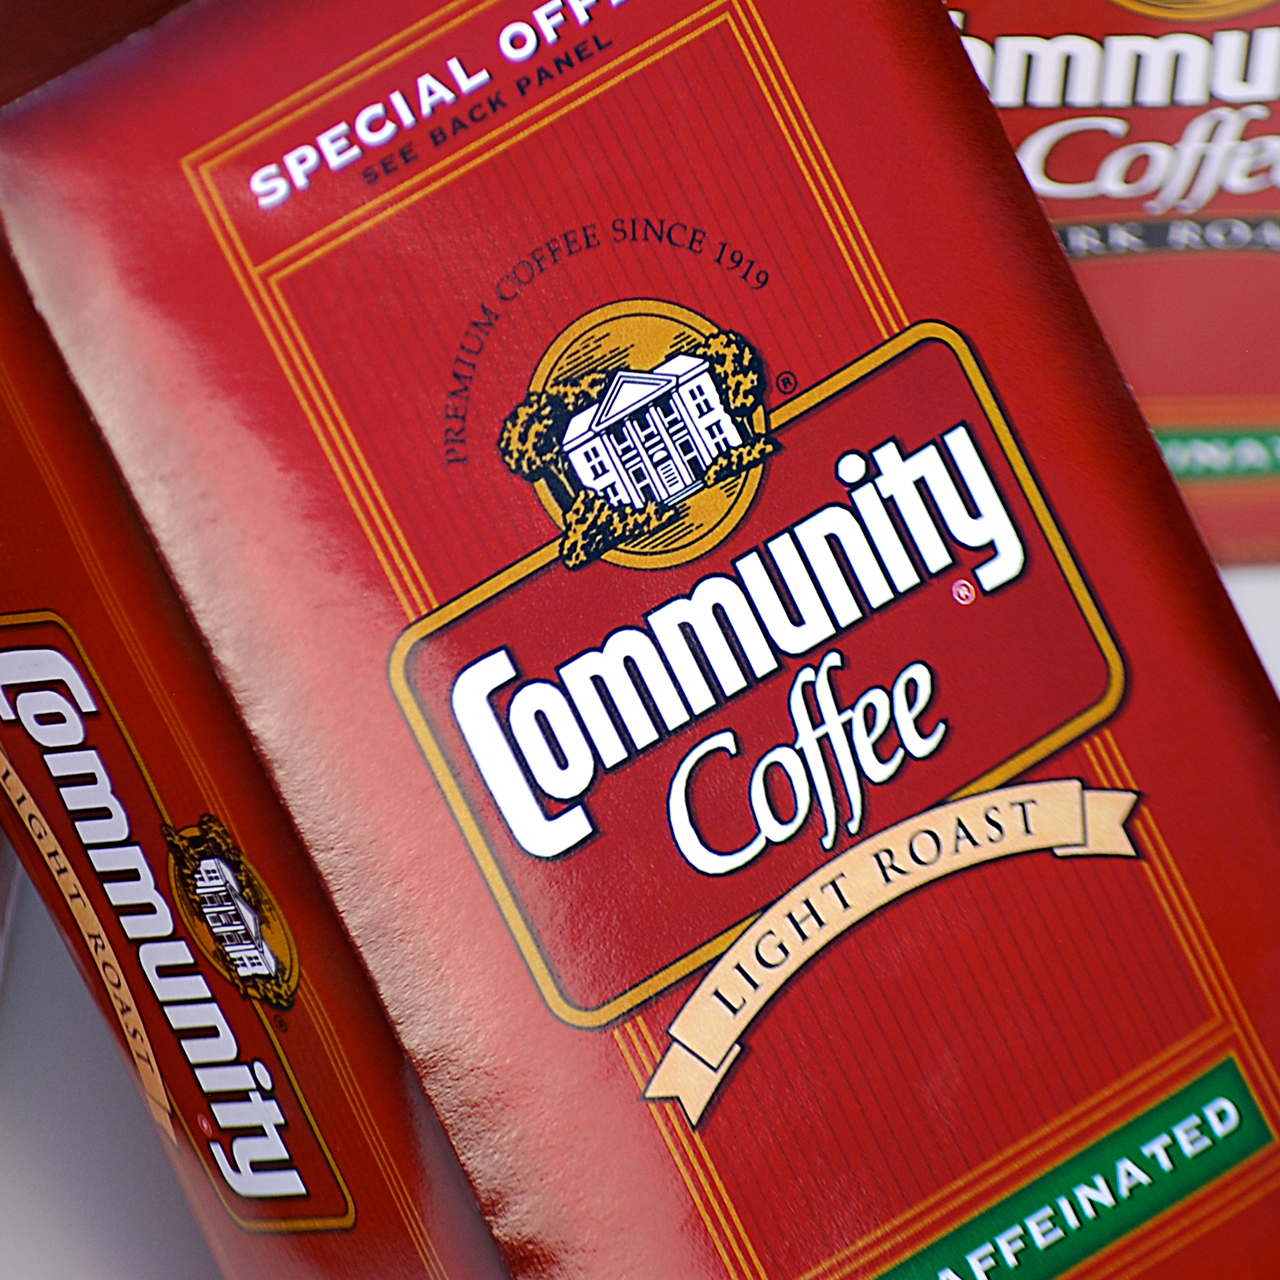 An image of the front of Community Coffee's package Design for Light Roast Decaffeinated Coffee